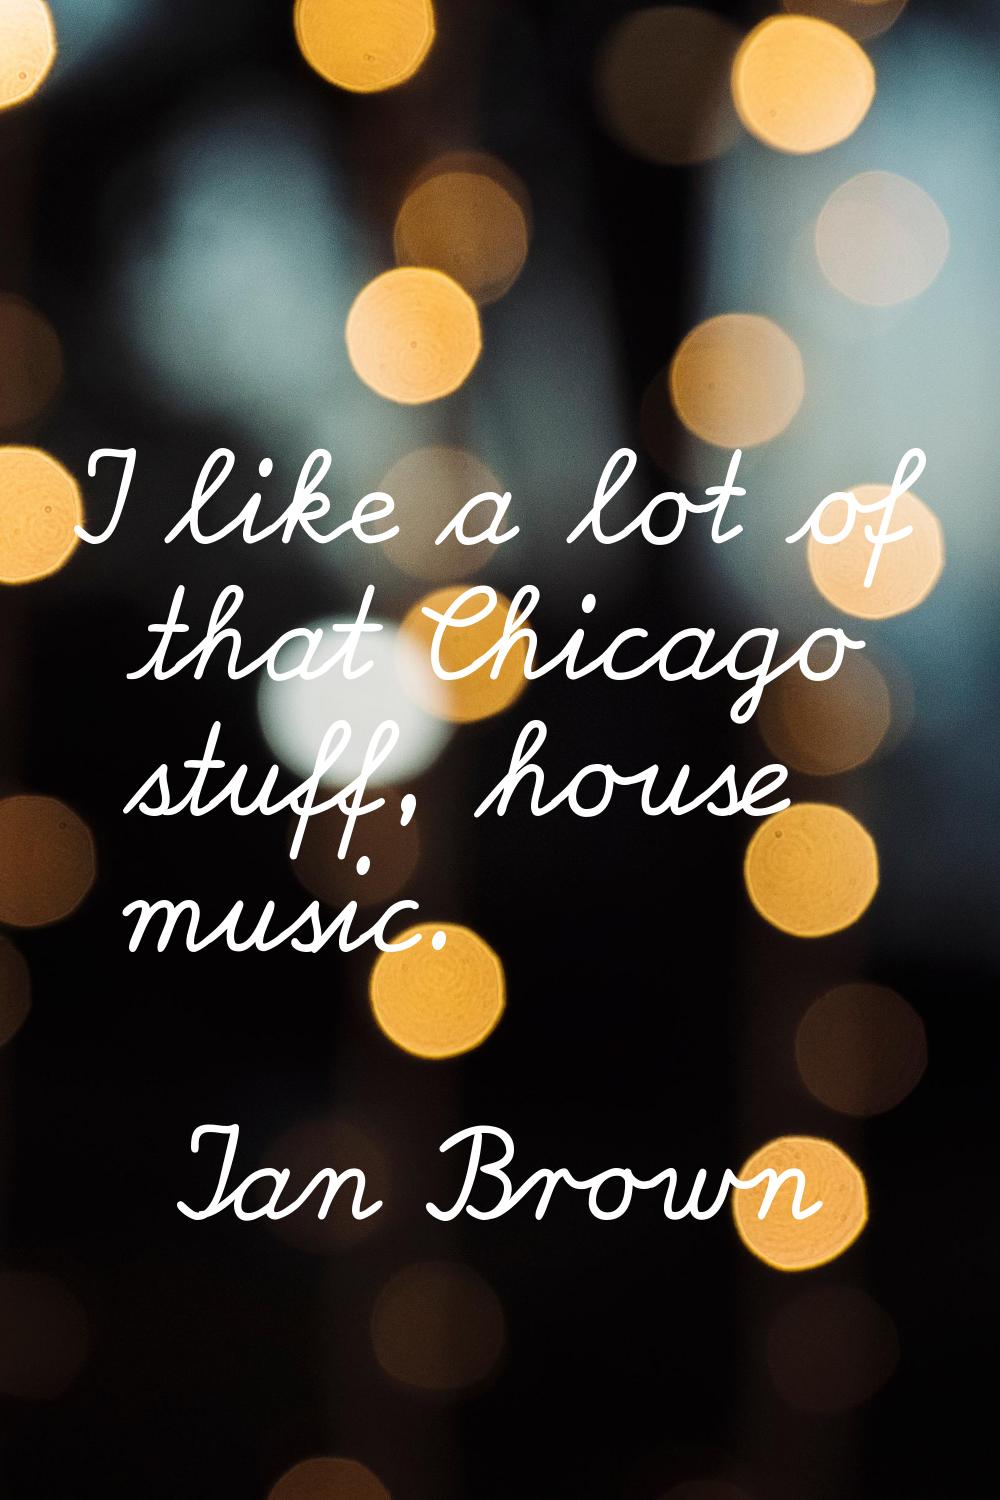 I like a lot of that Chicago stuff, house music.